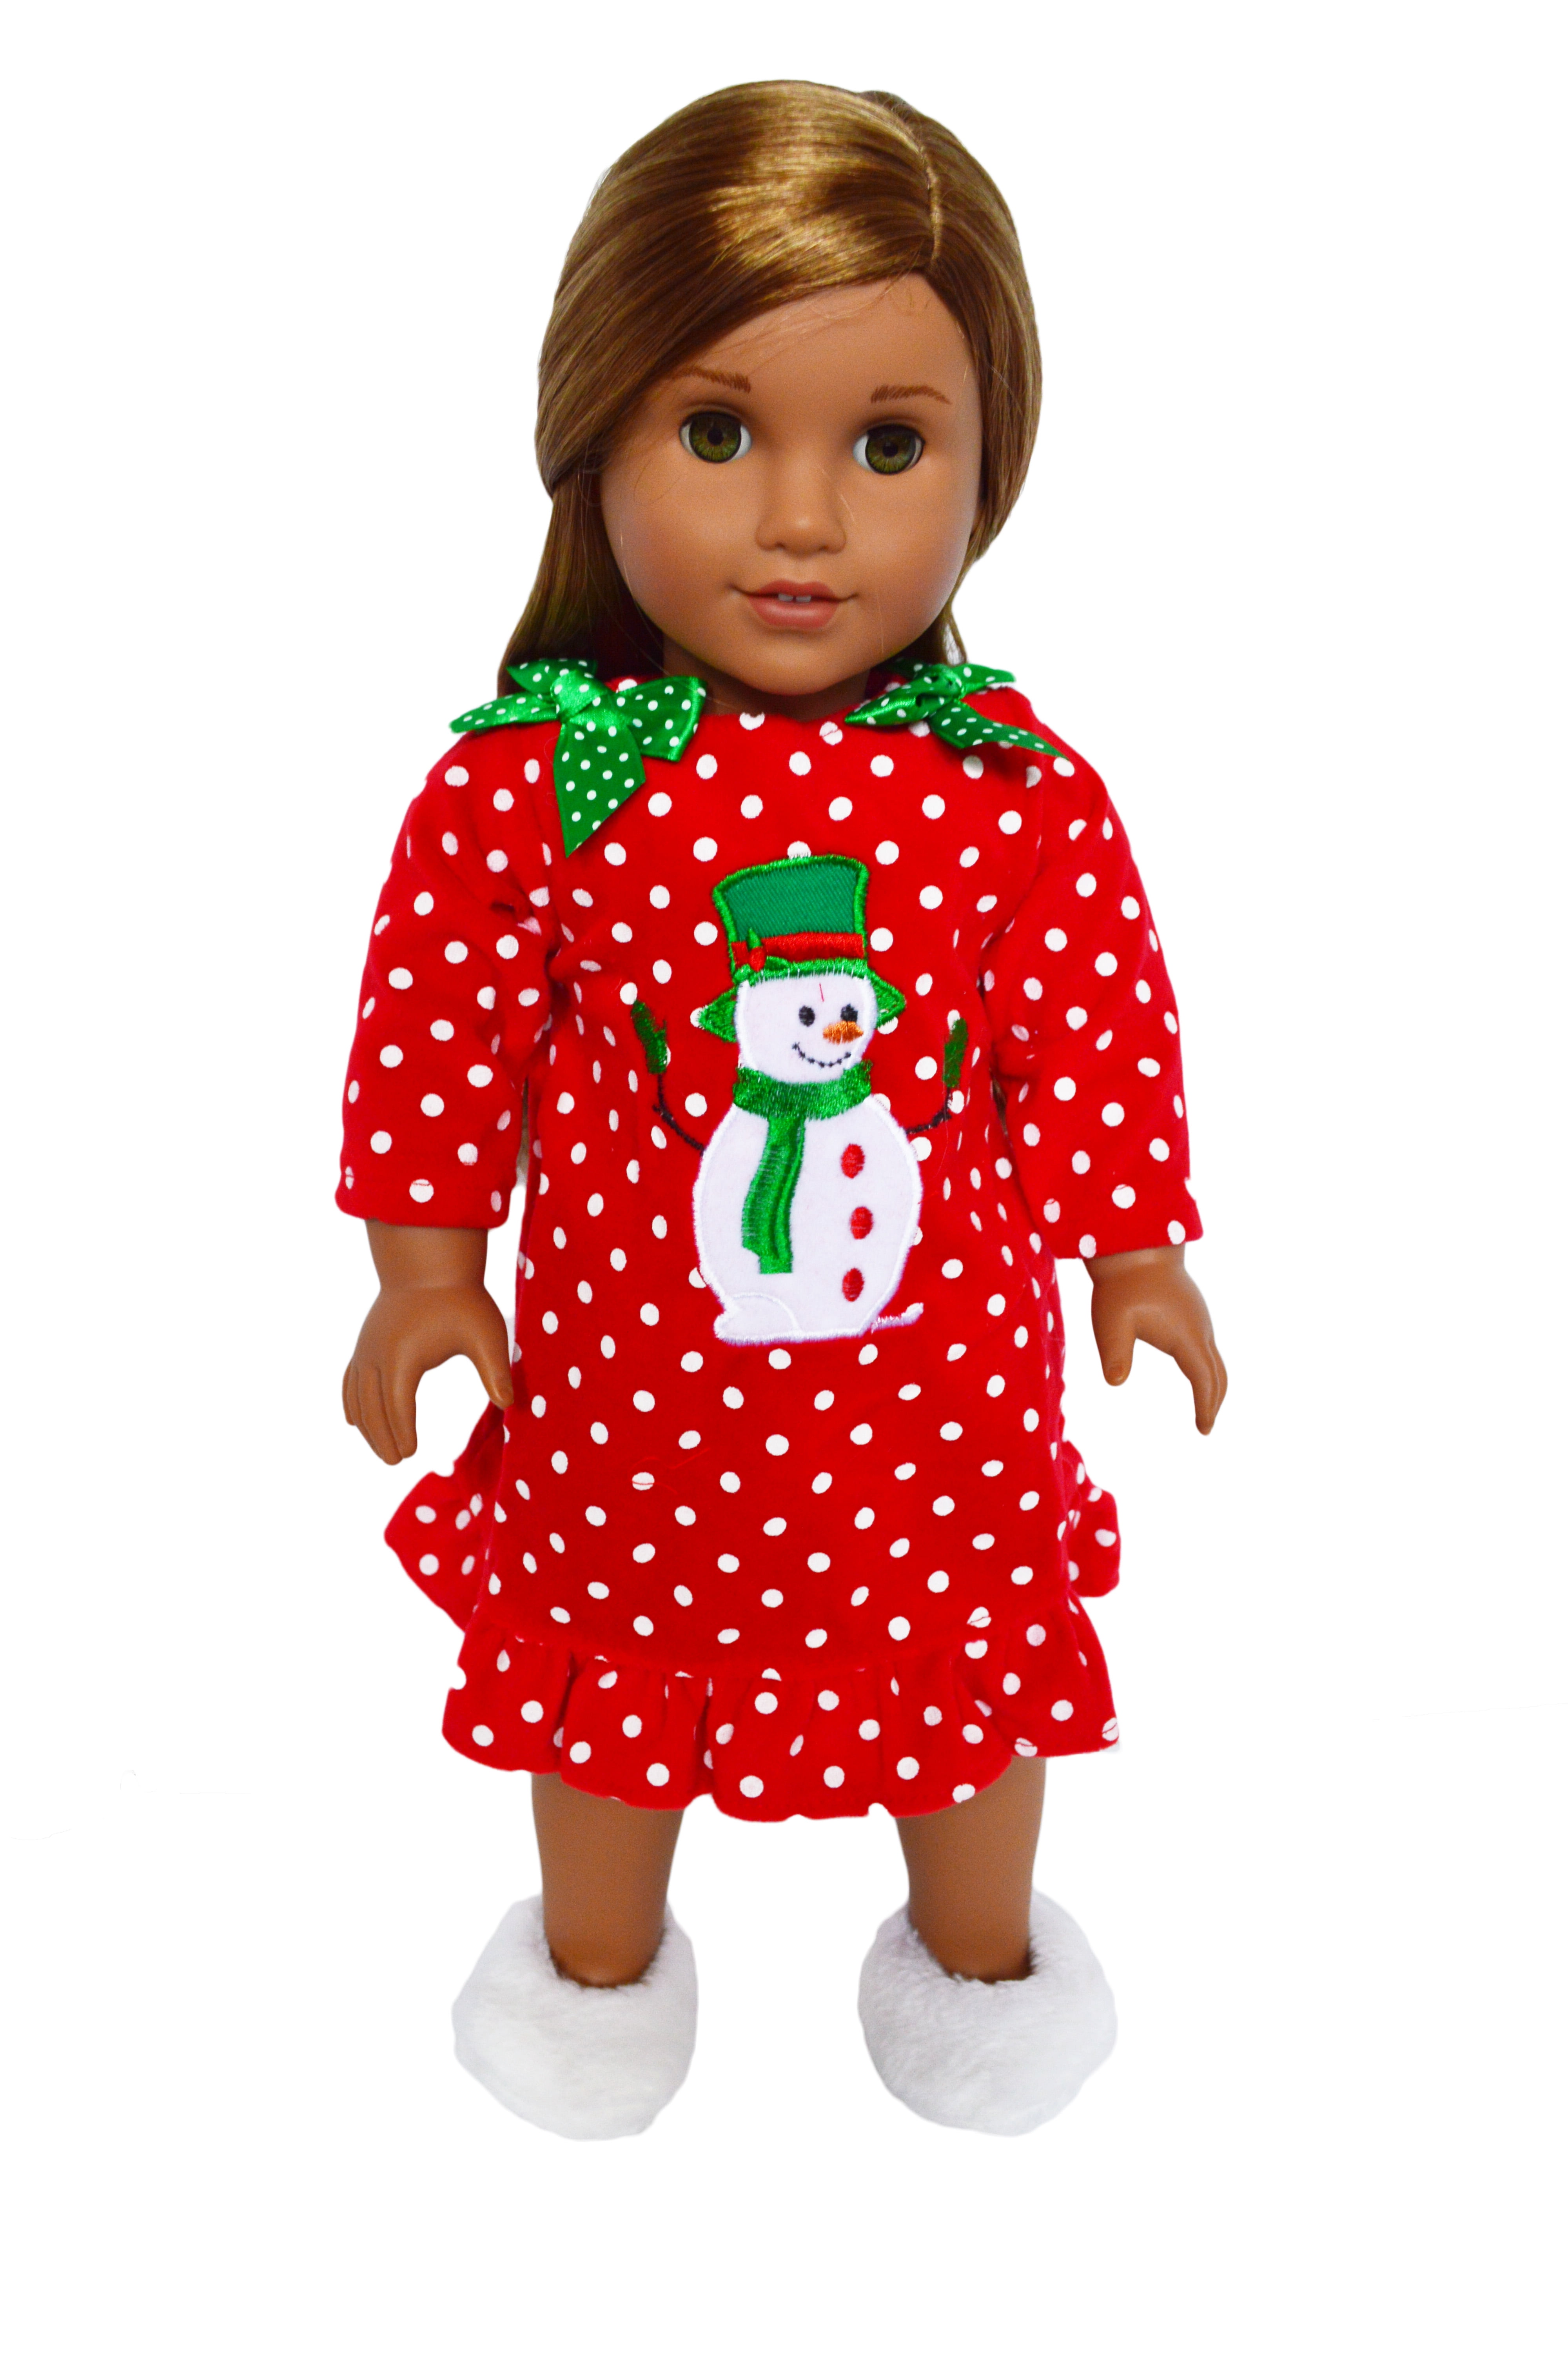 Handmade Dolls Snowman Dress Fits American Girl Or Our Generation 